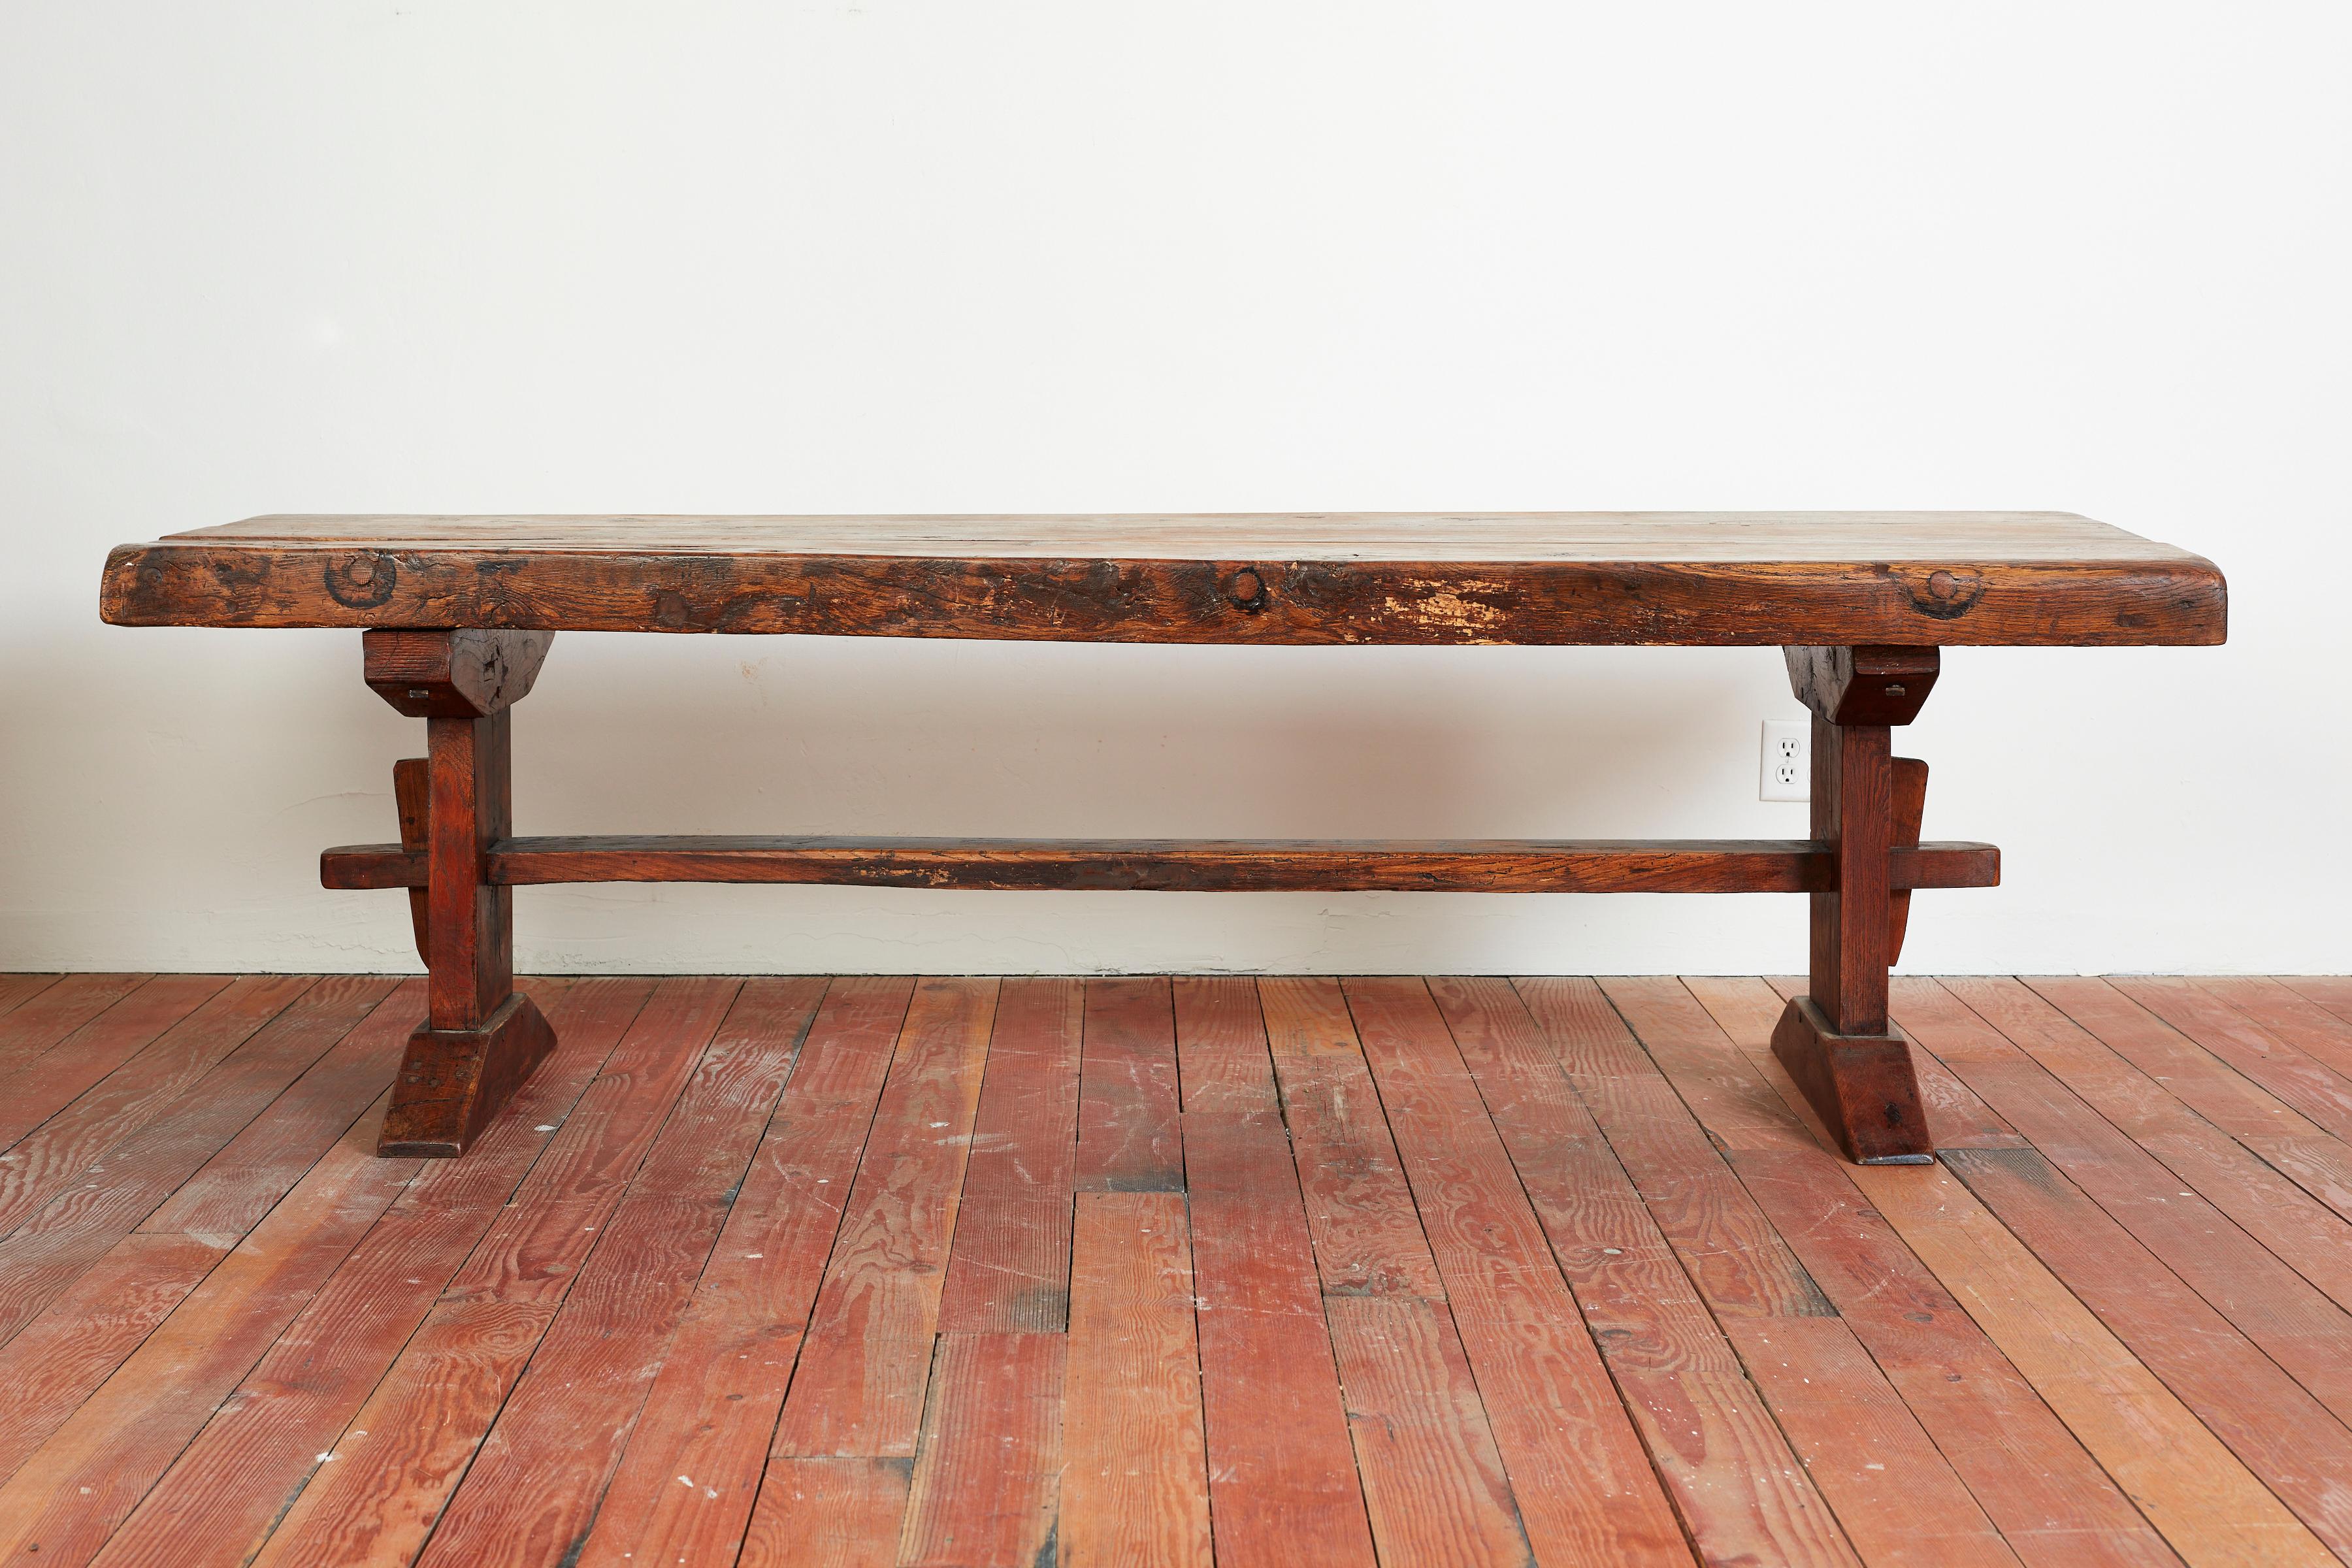 Absolutely beautiful French Oak farm table - France, 1940s
Thick dark oak with gorgeous patina and visible dark grain and knots within the oak wood.